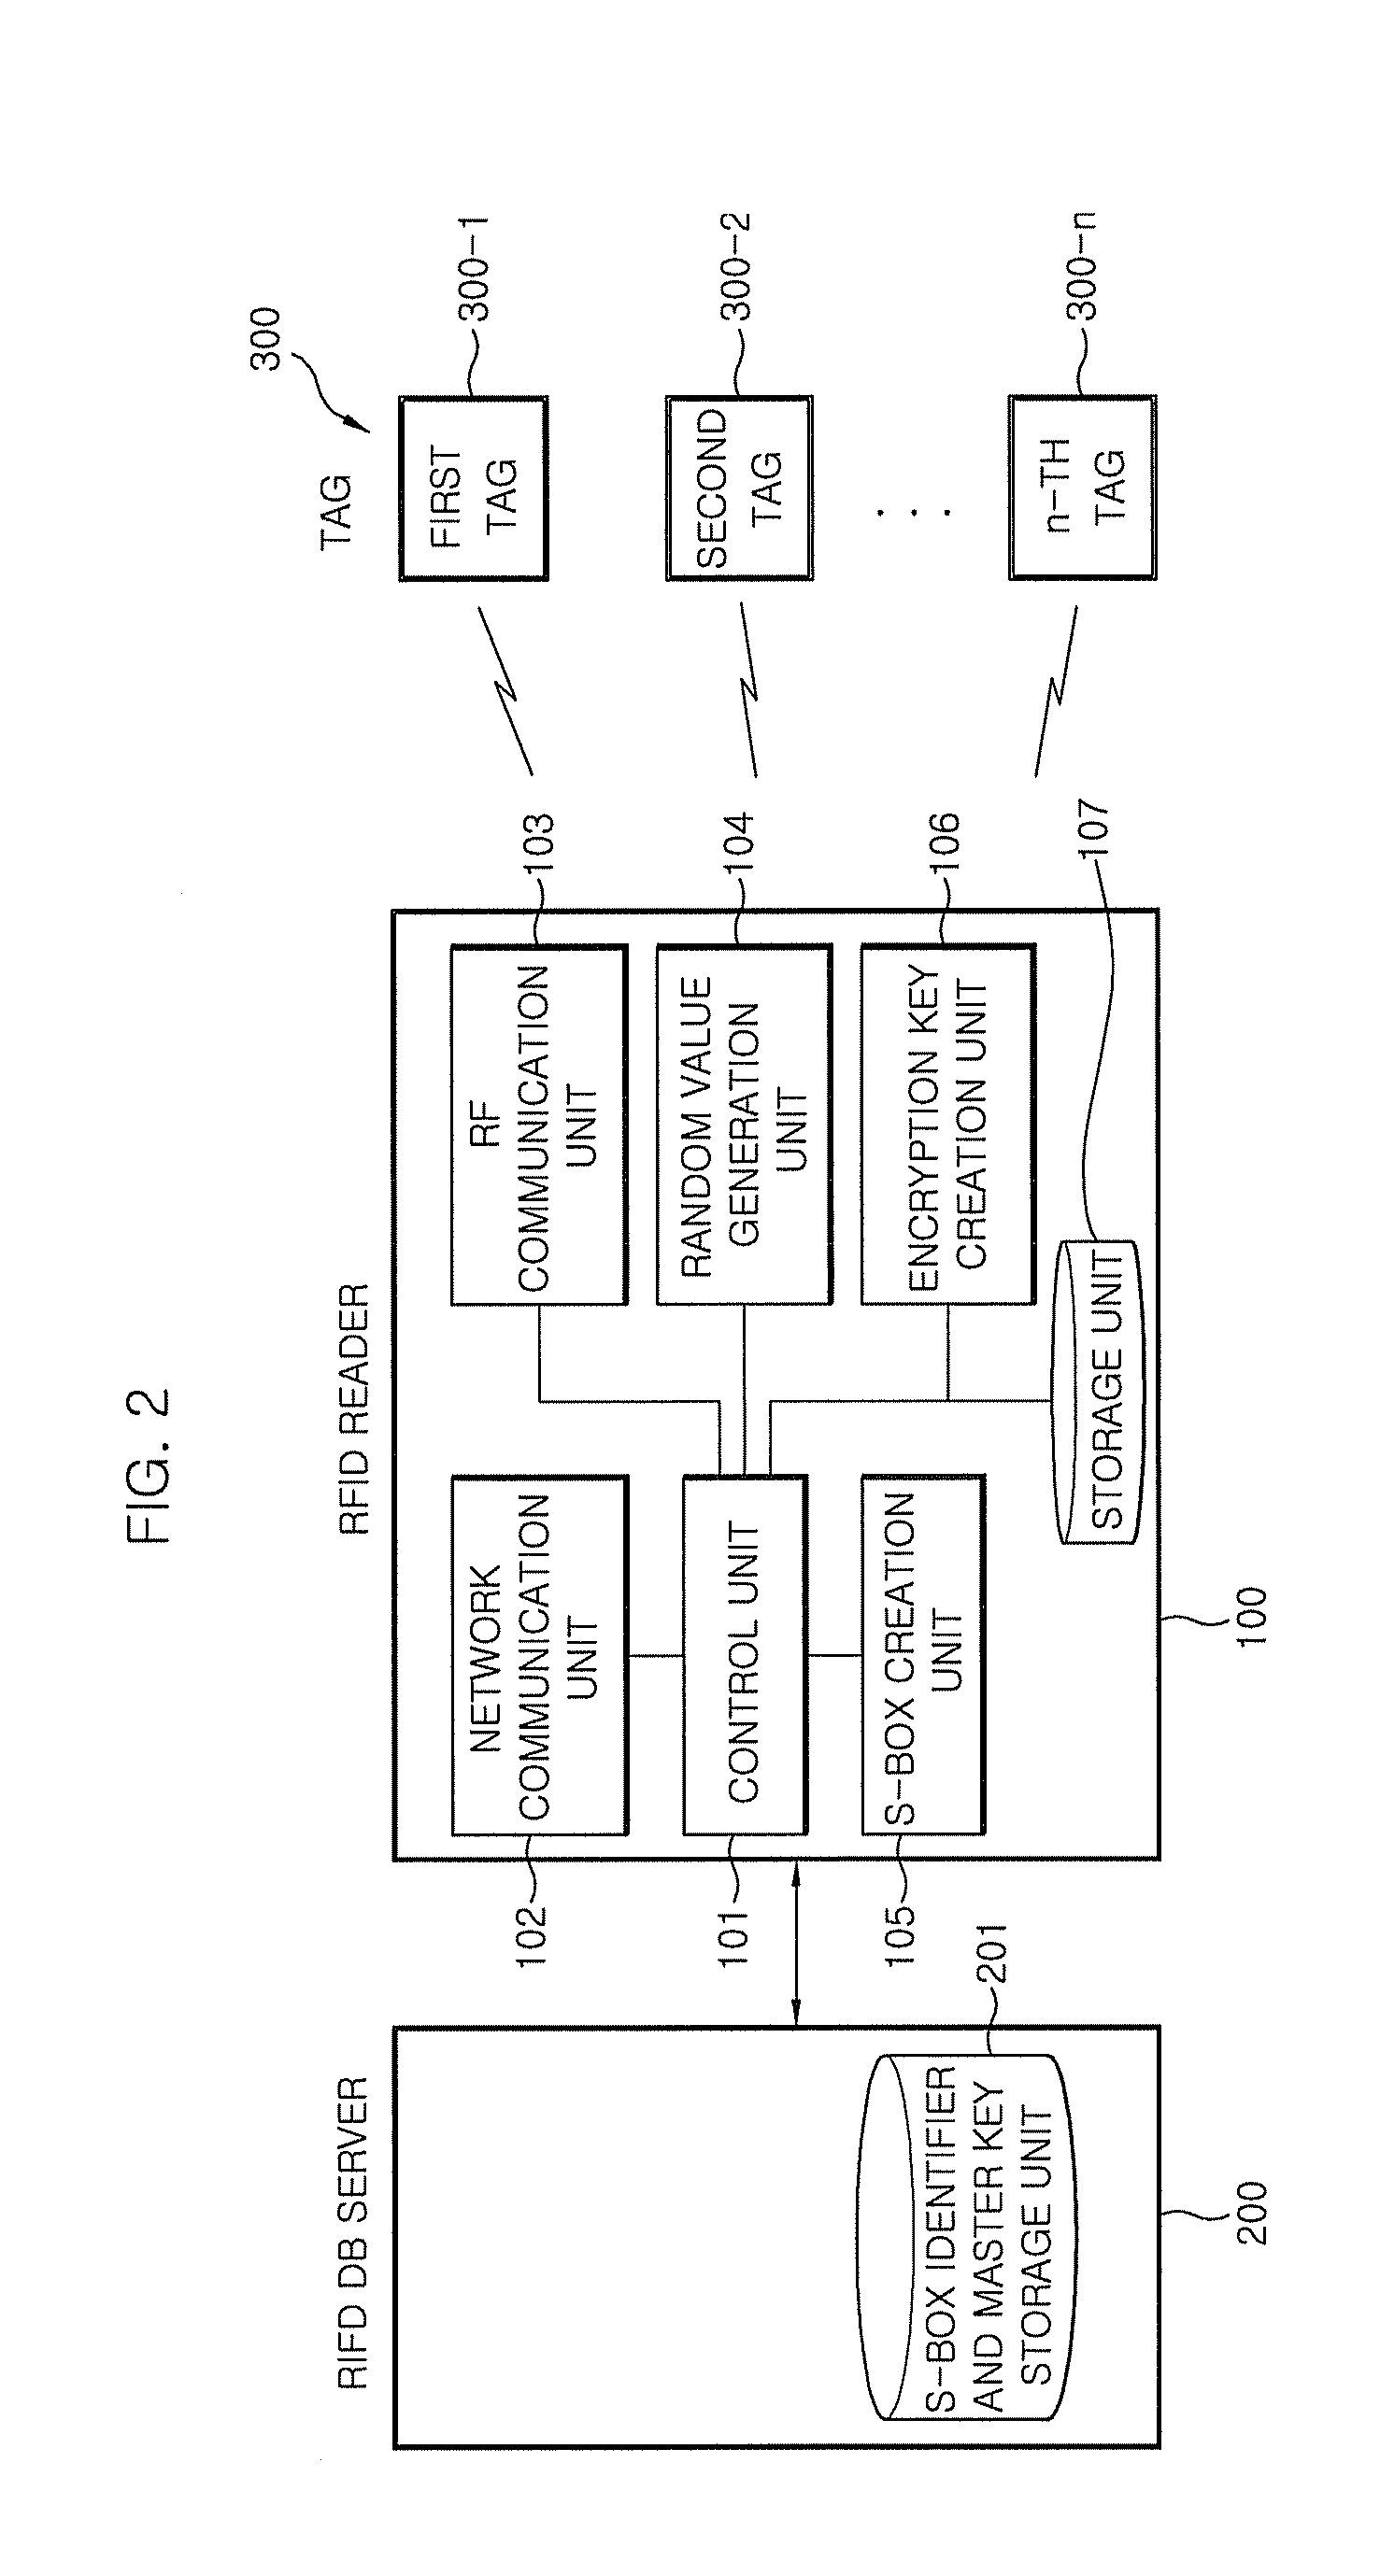 Method of authenticating RFID tag for reducing load of server and RFID reader using the same